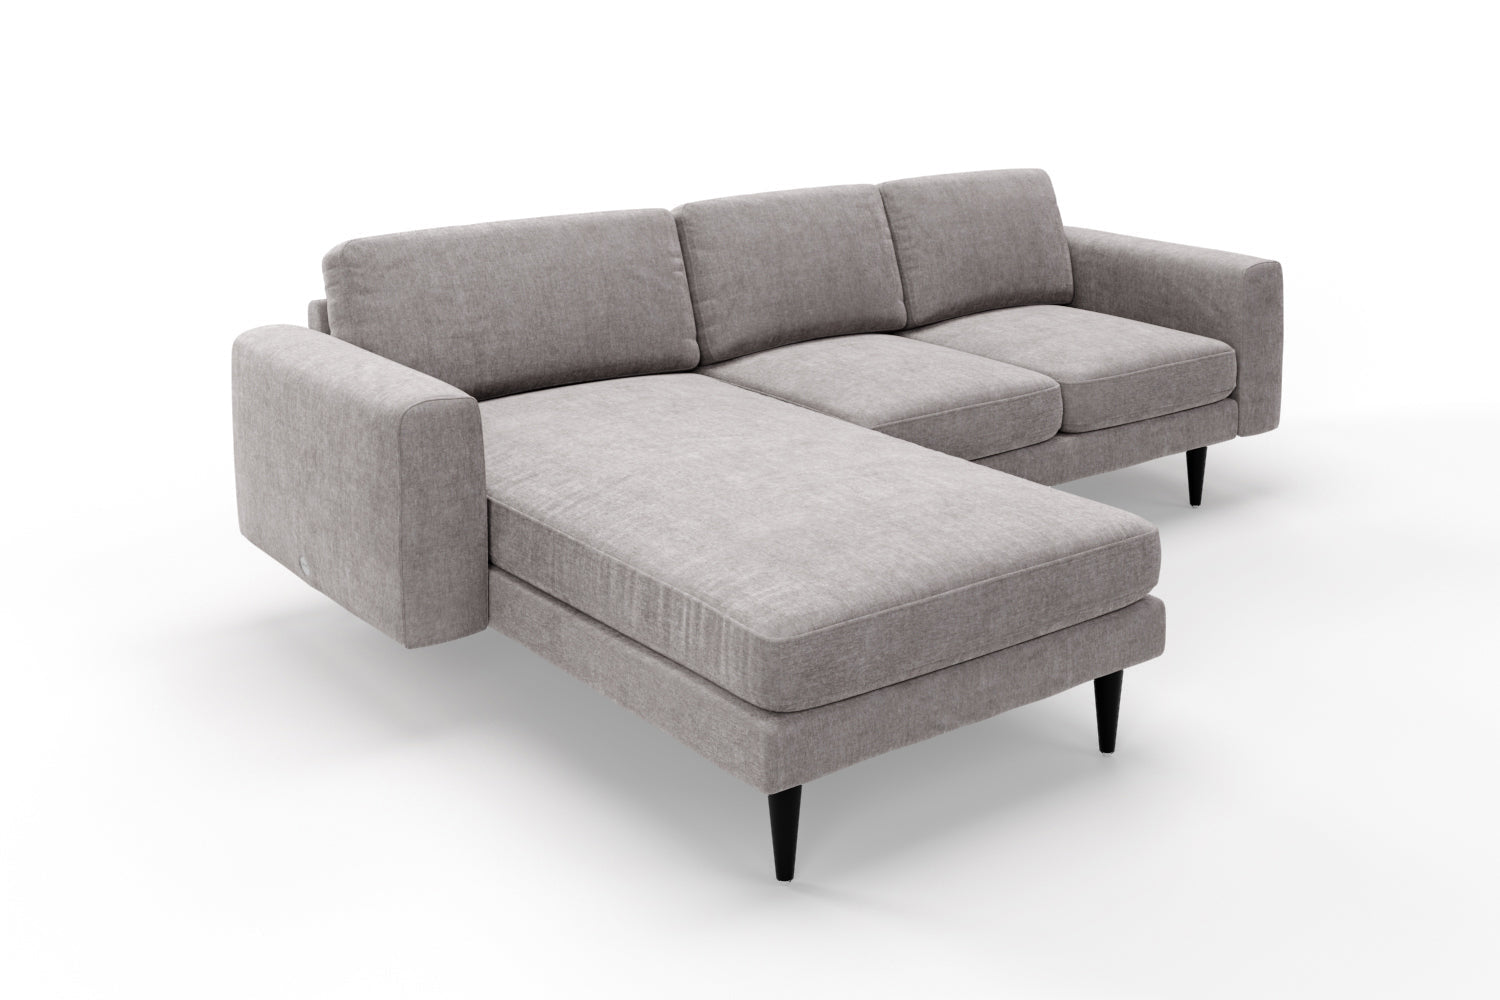 SNUG | The Big Chill Left Hand Chaise Sofa in Mid Grey